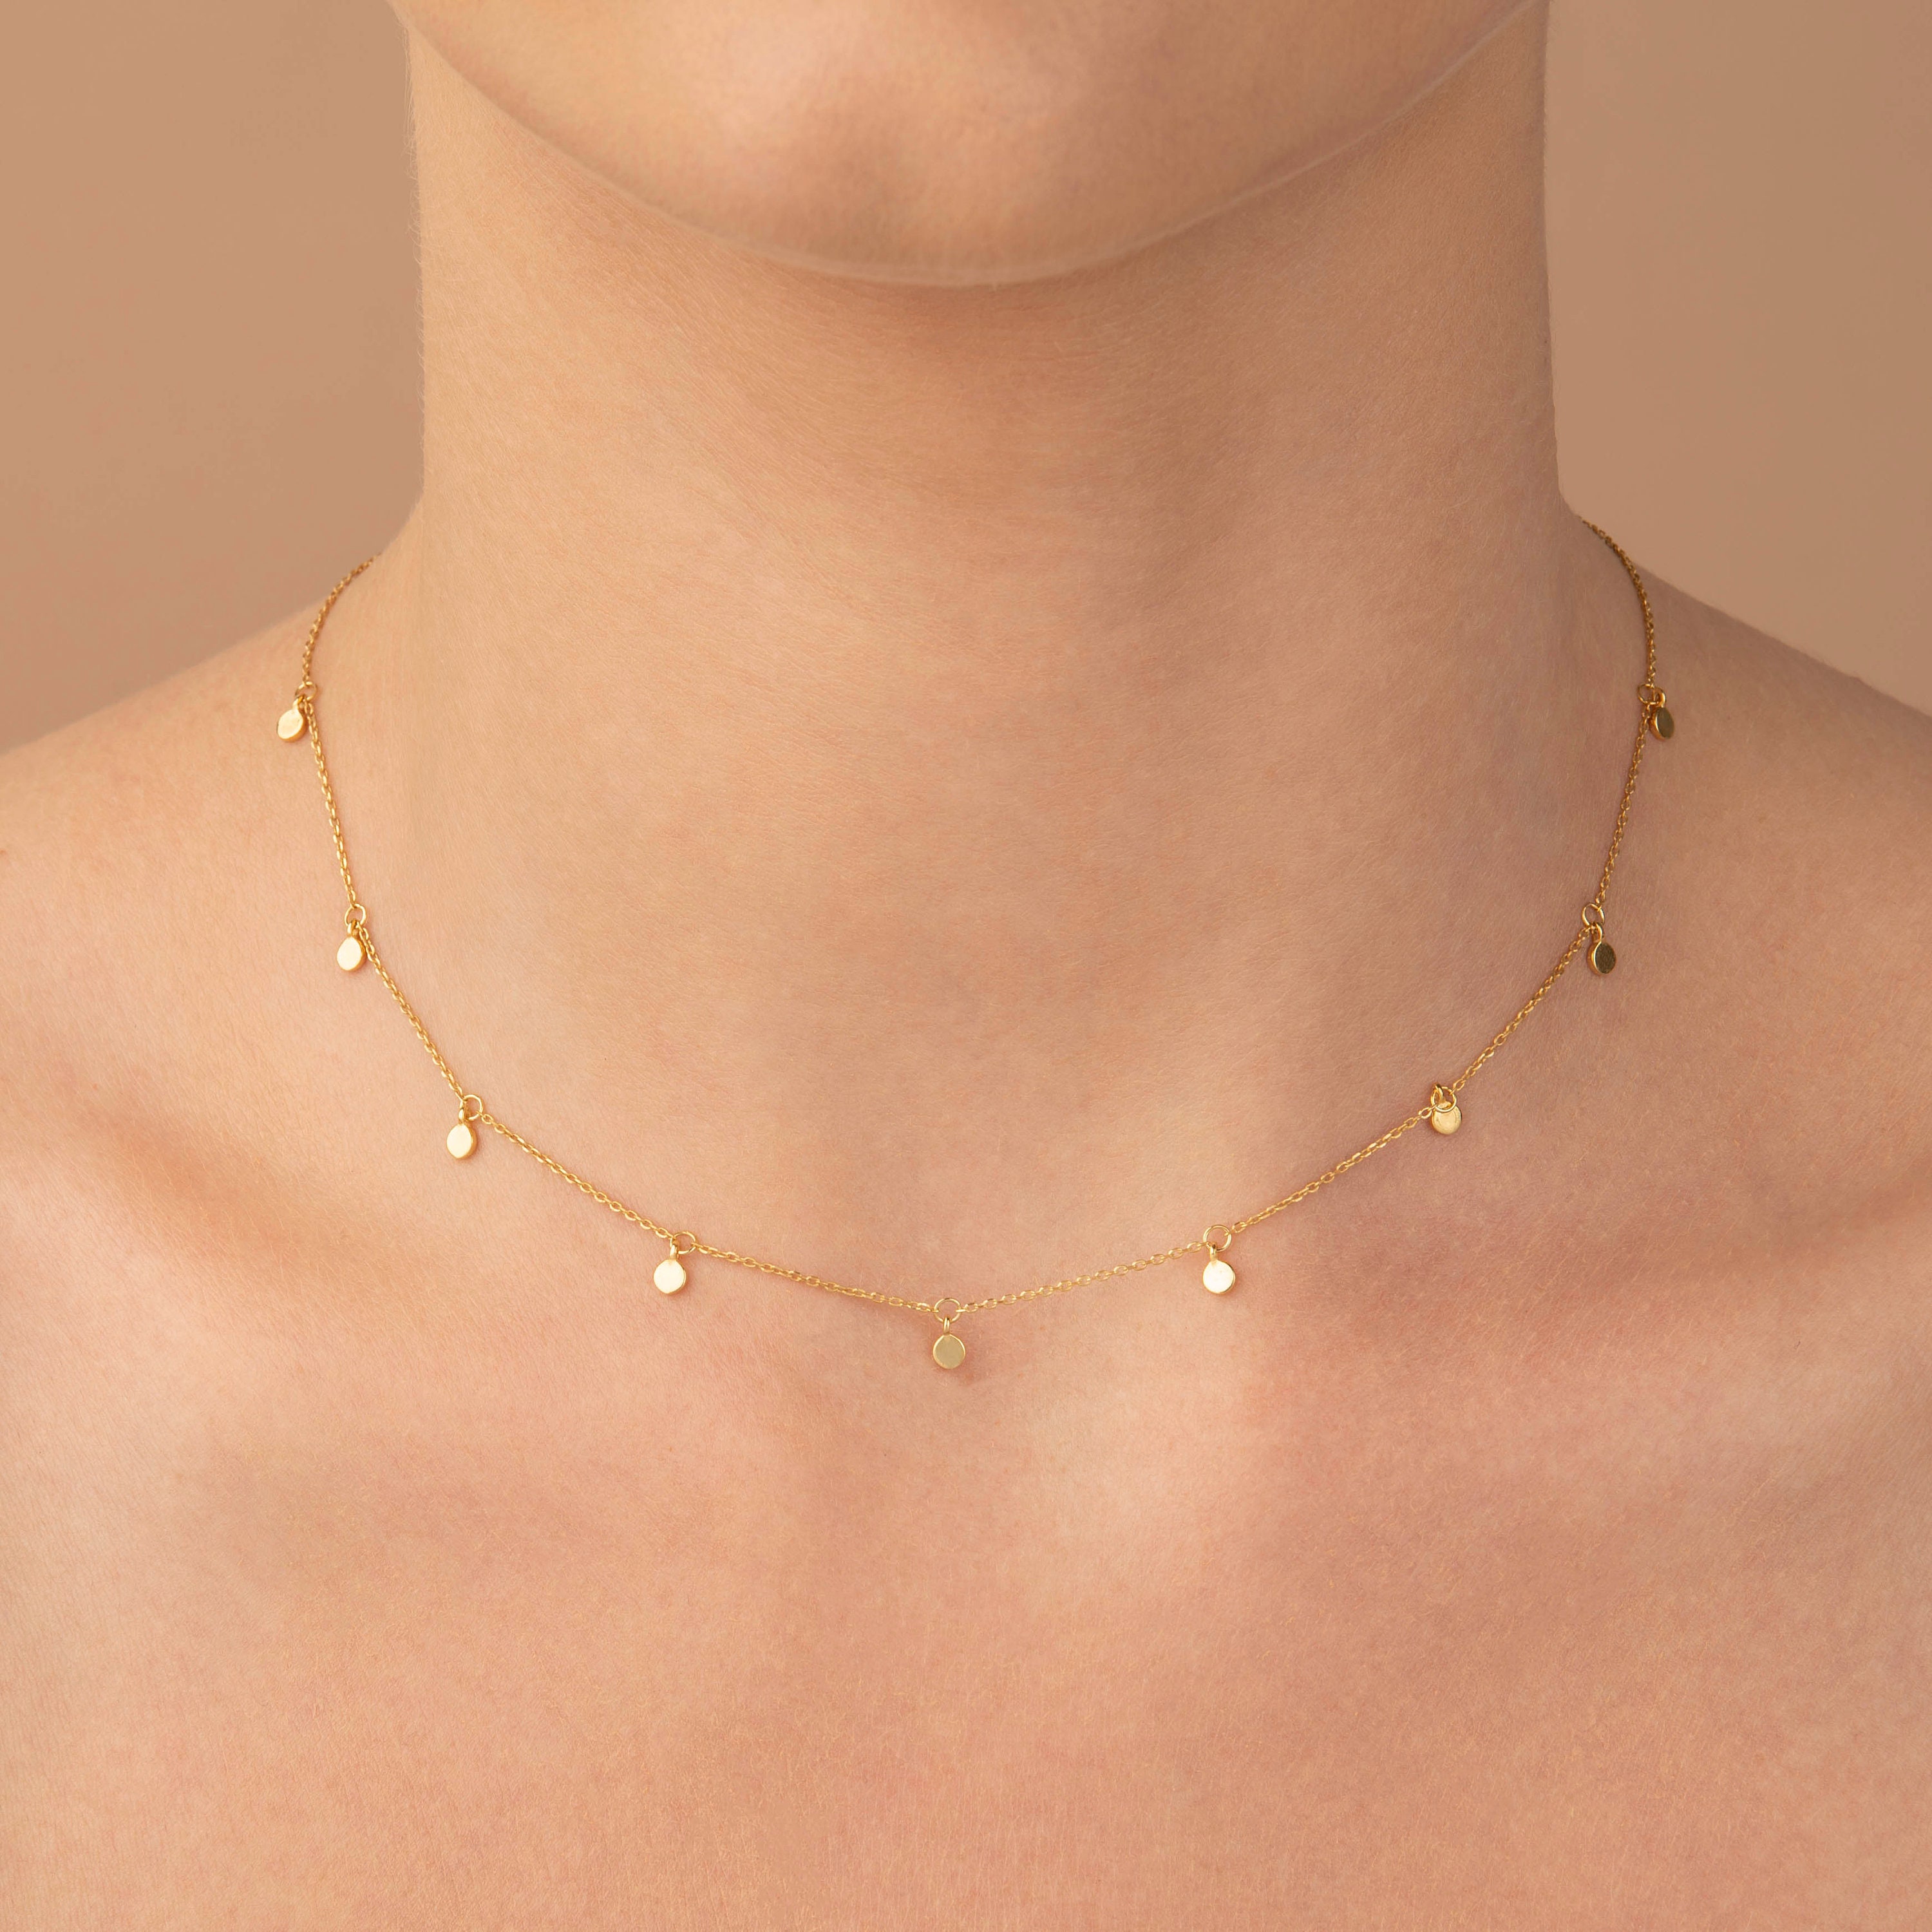 Dotted Gold Chain Necklace, Layering Gold Necklace, Minimalist Necklace,  Dainty Gold Necklace for Women, Simple Gold Necklace 